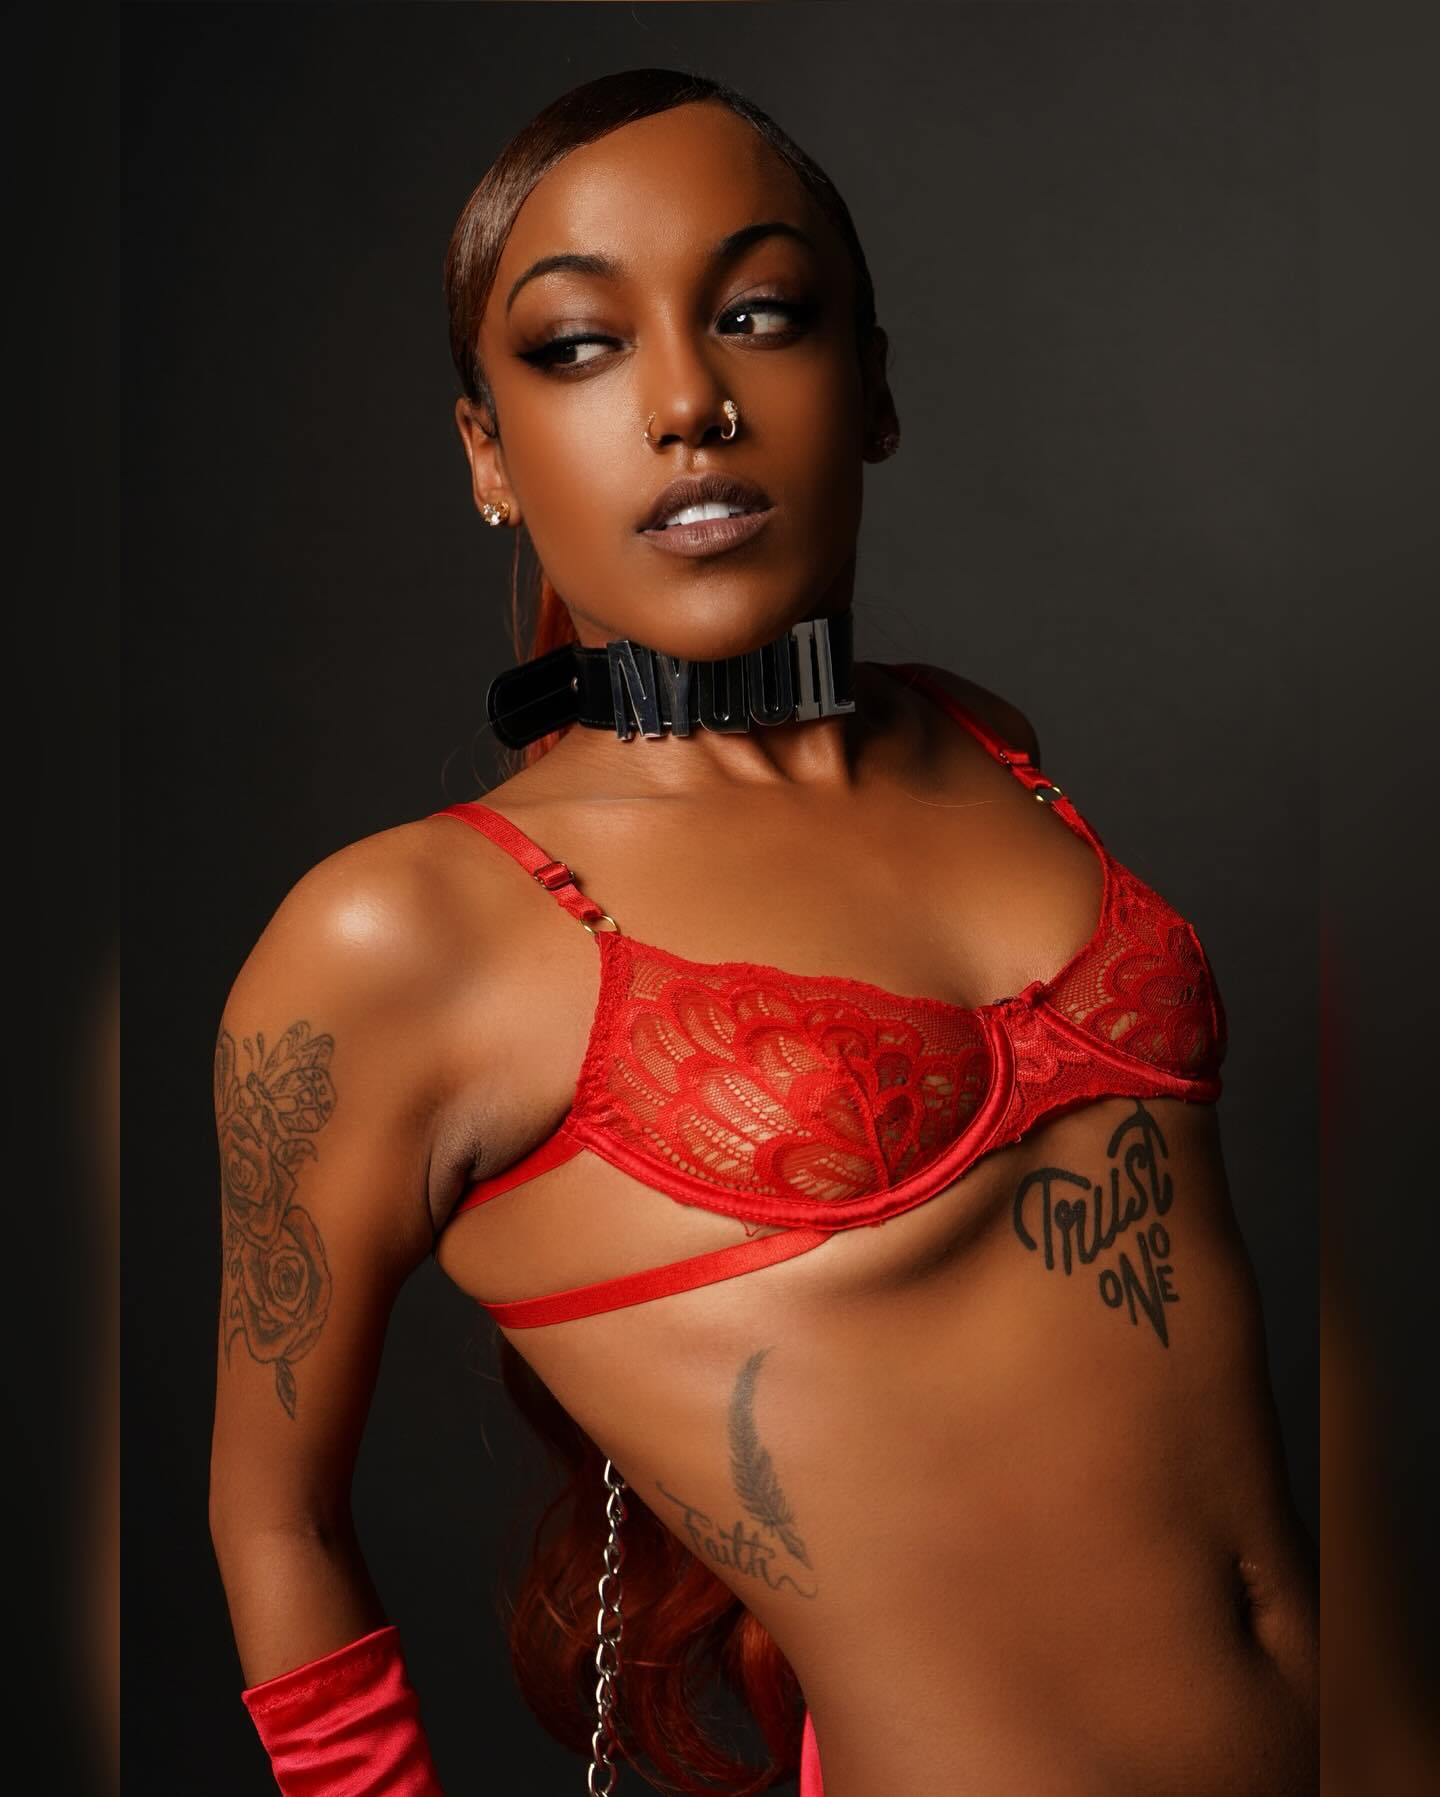 A DreamDoll Never Too Far Off The Leash 😈🥰🔥 Say My Name …. It’s NyQuil Baby 💋